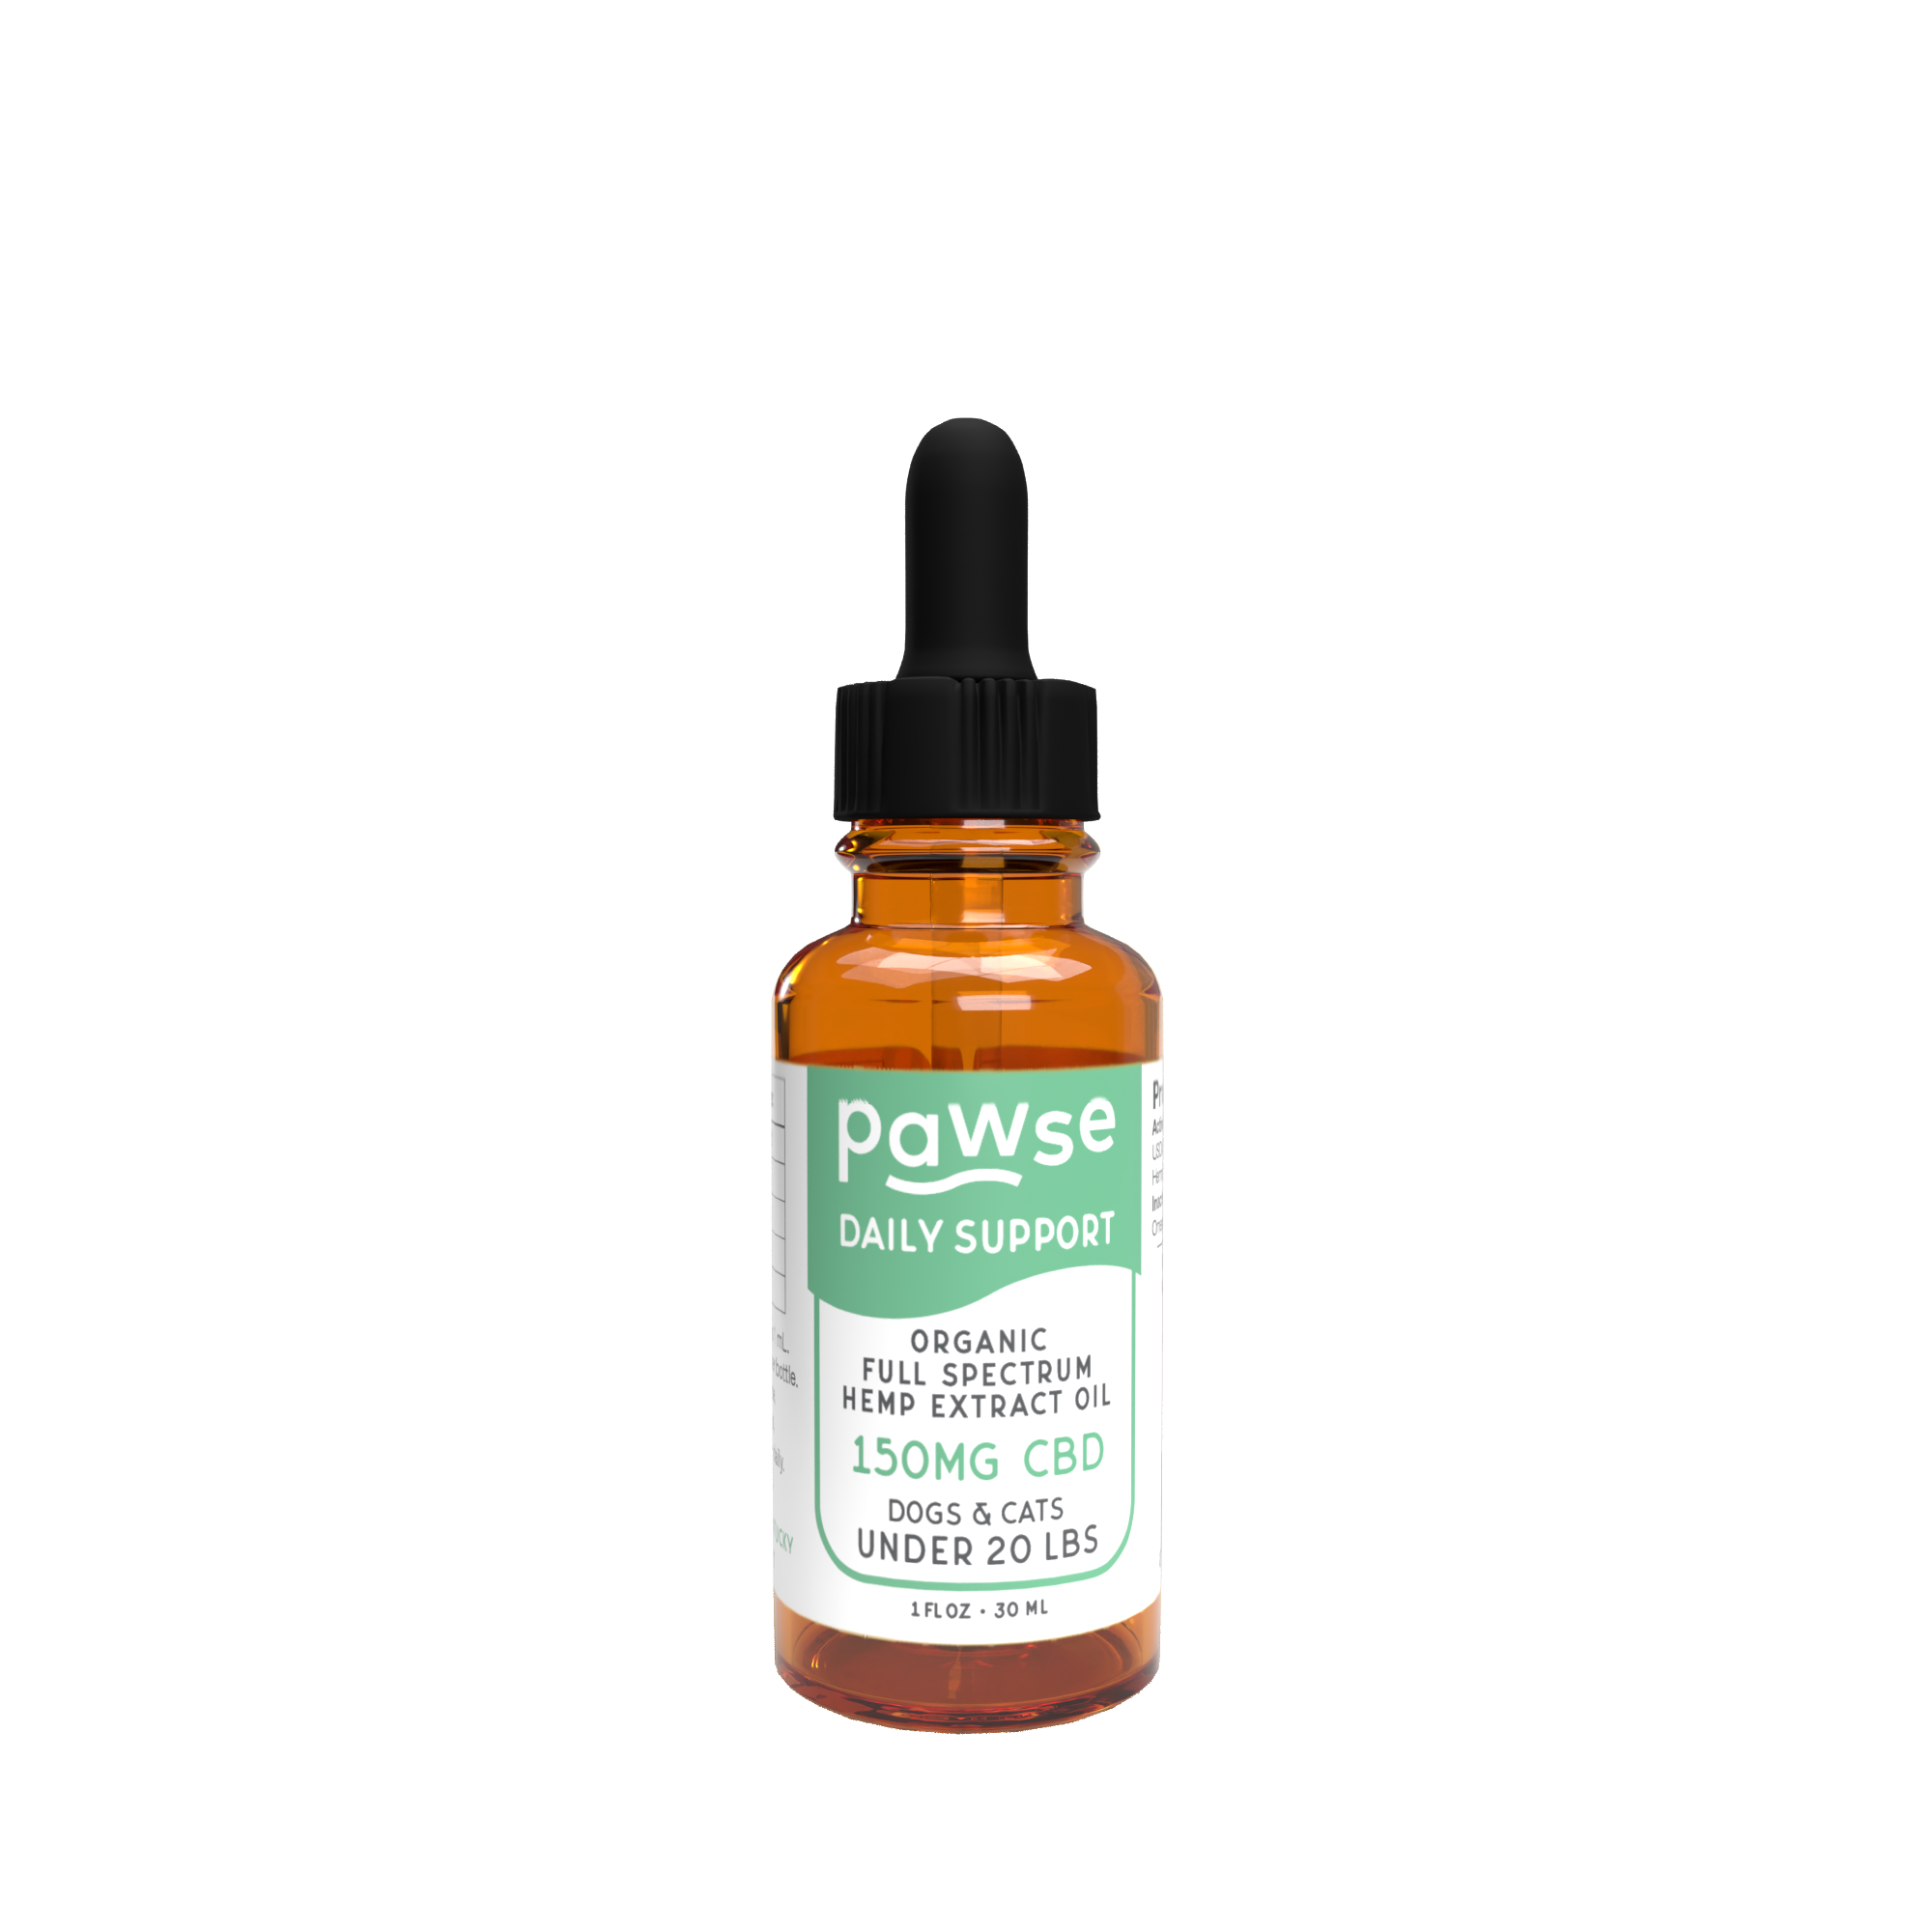 Daily Support CBD Oil for Pets Under 20lbs